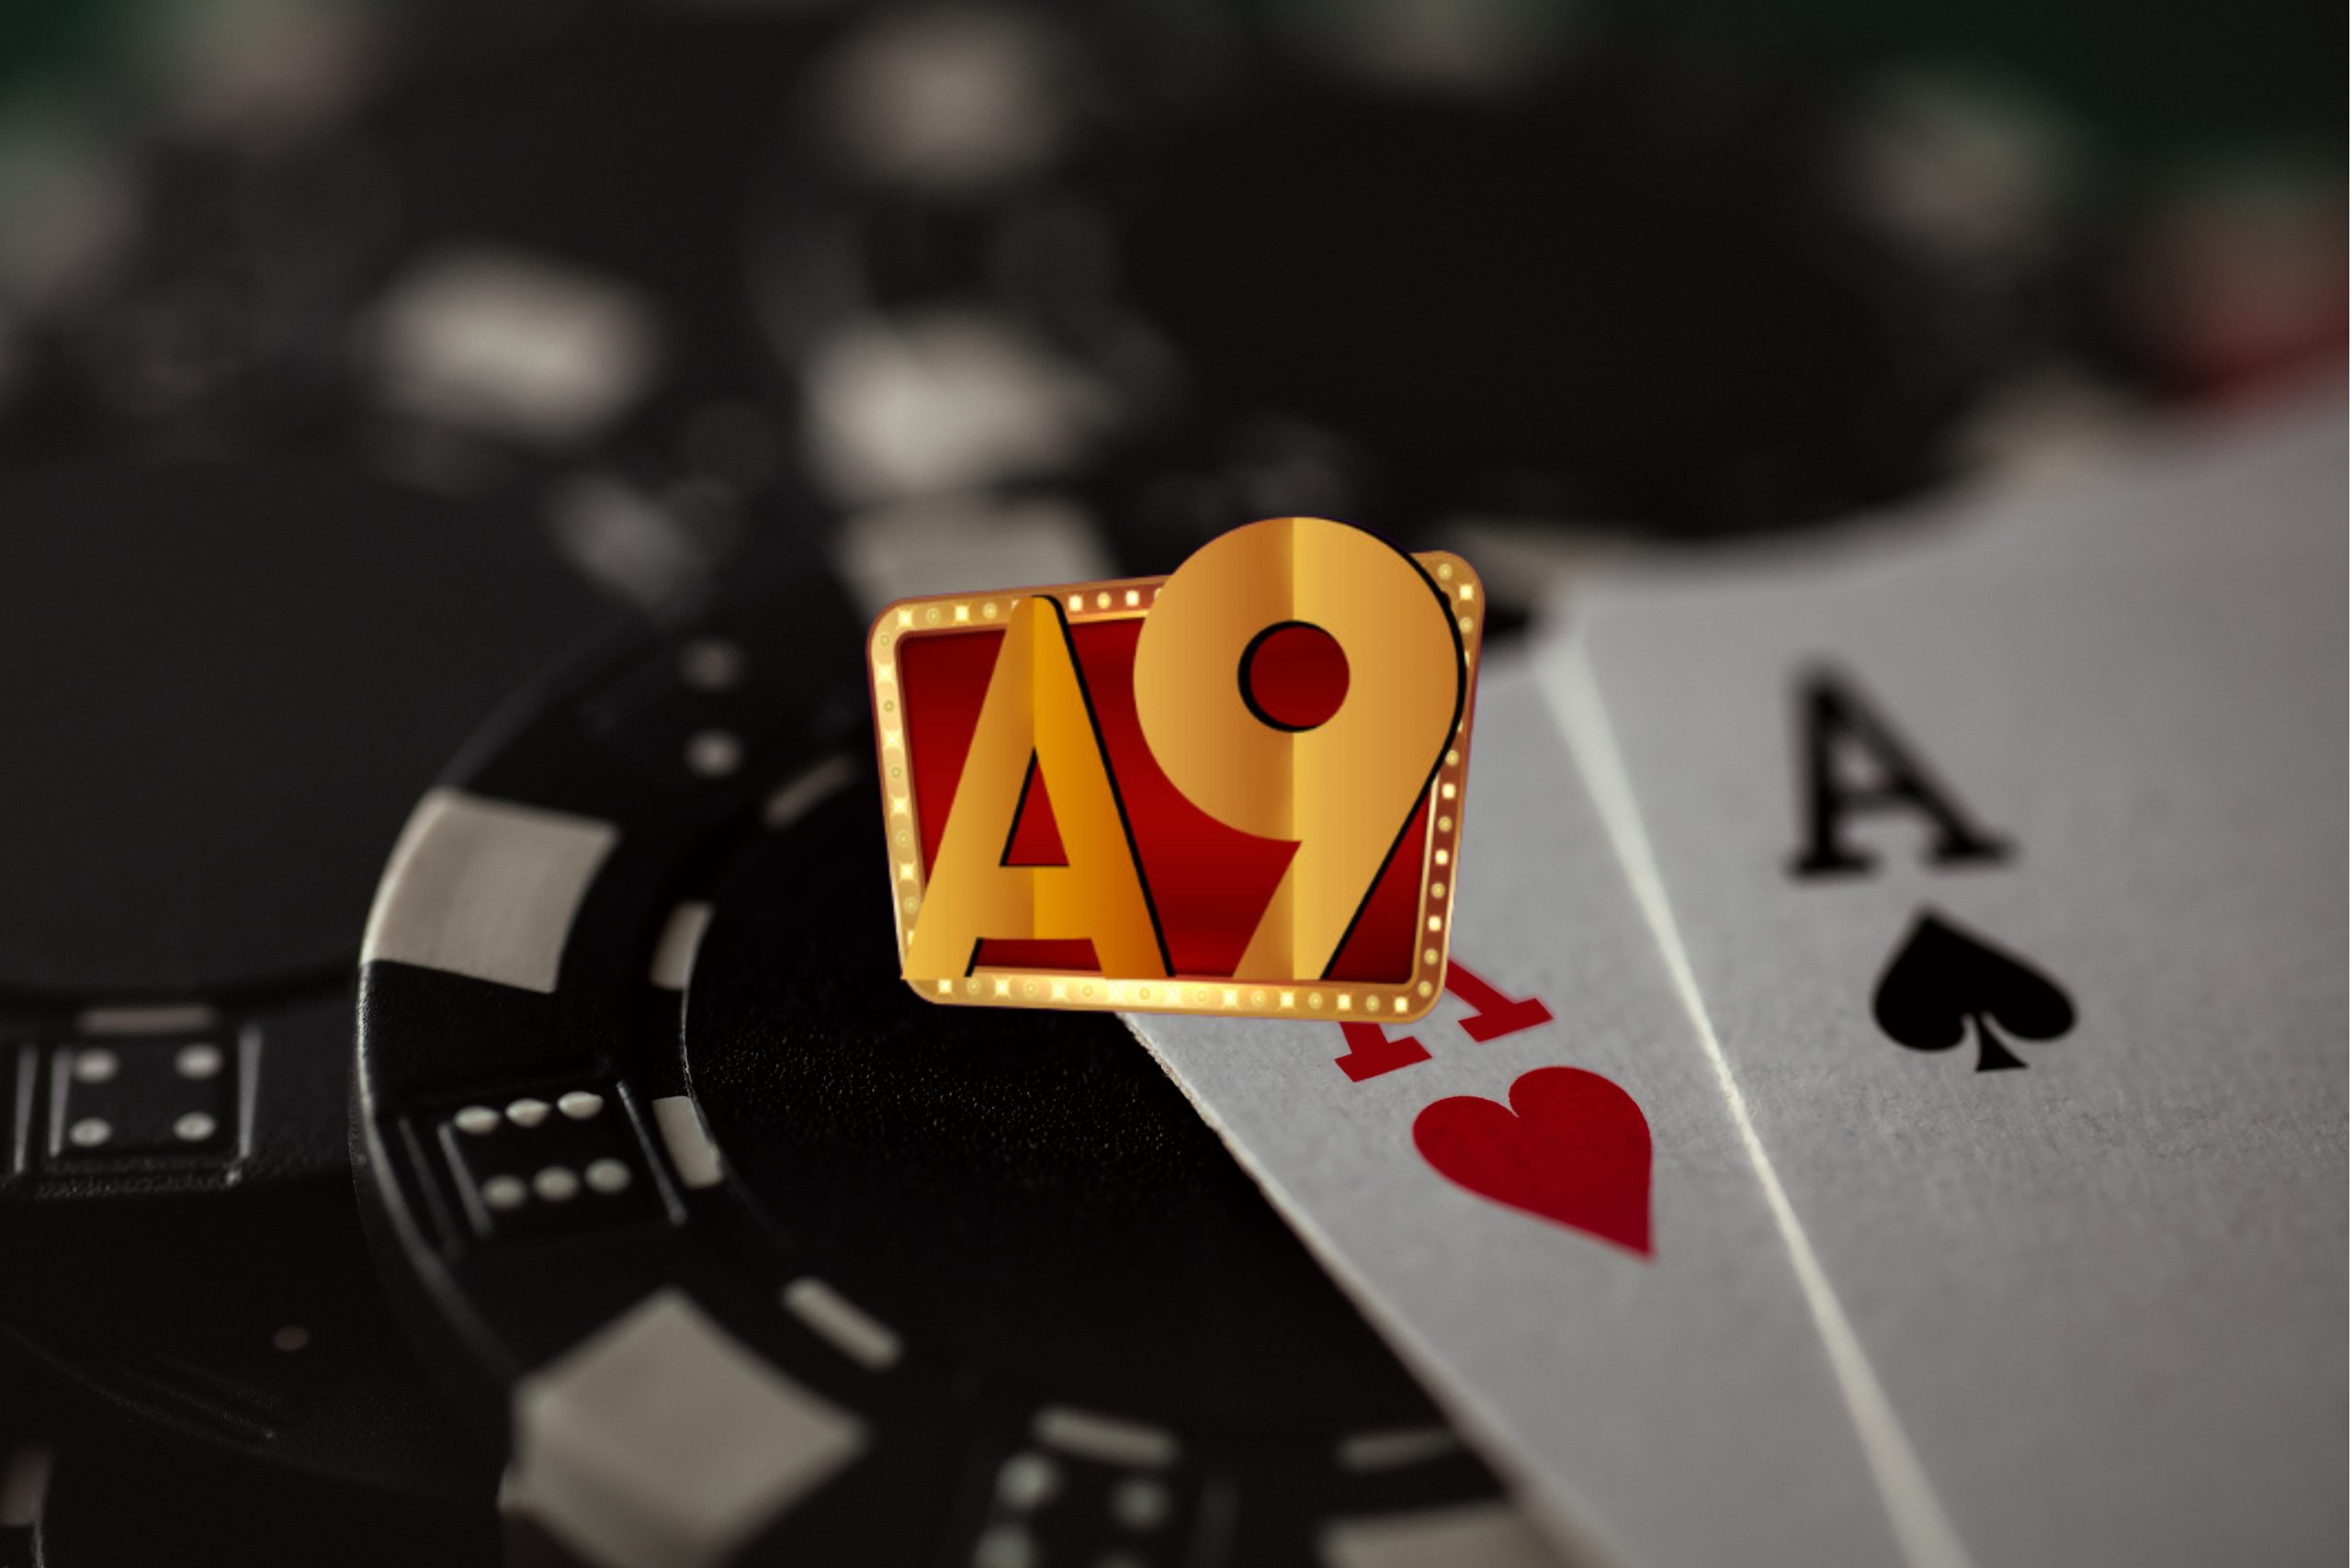 The Advantages Of A9Play Casino Over Traditional Casinos